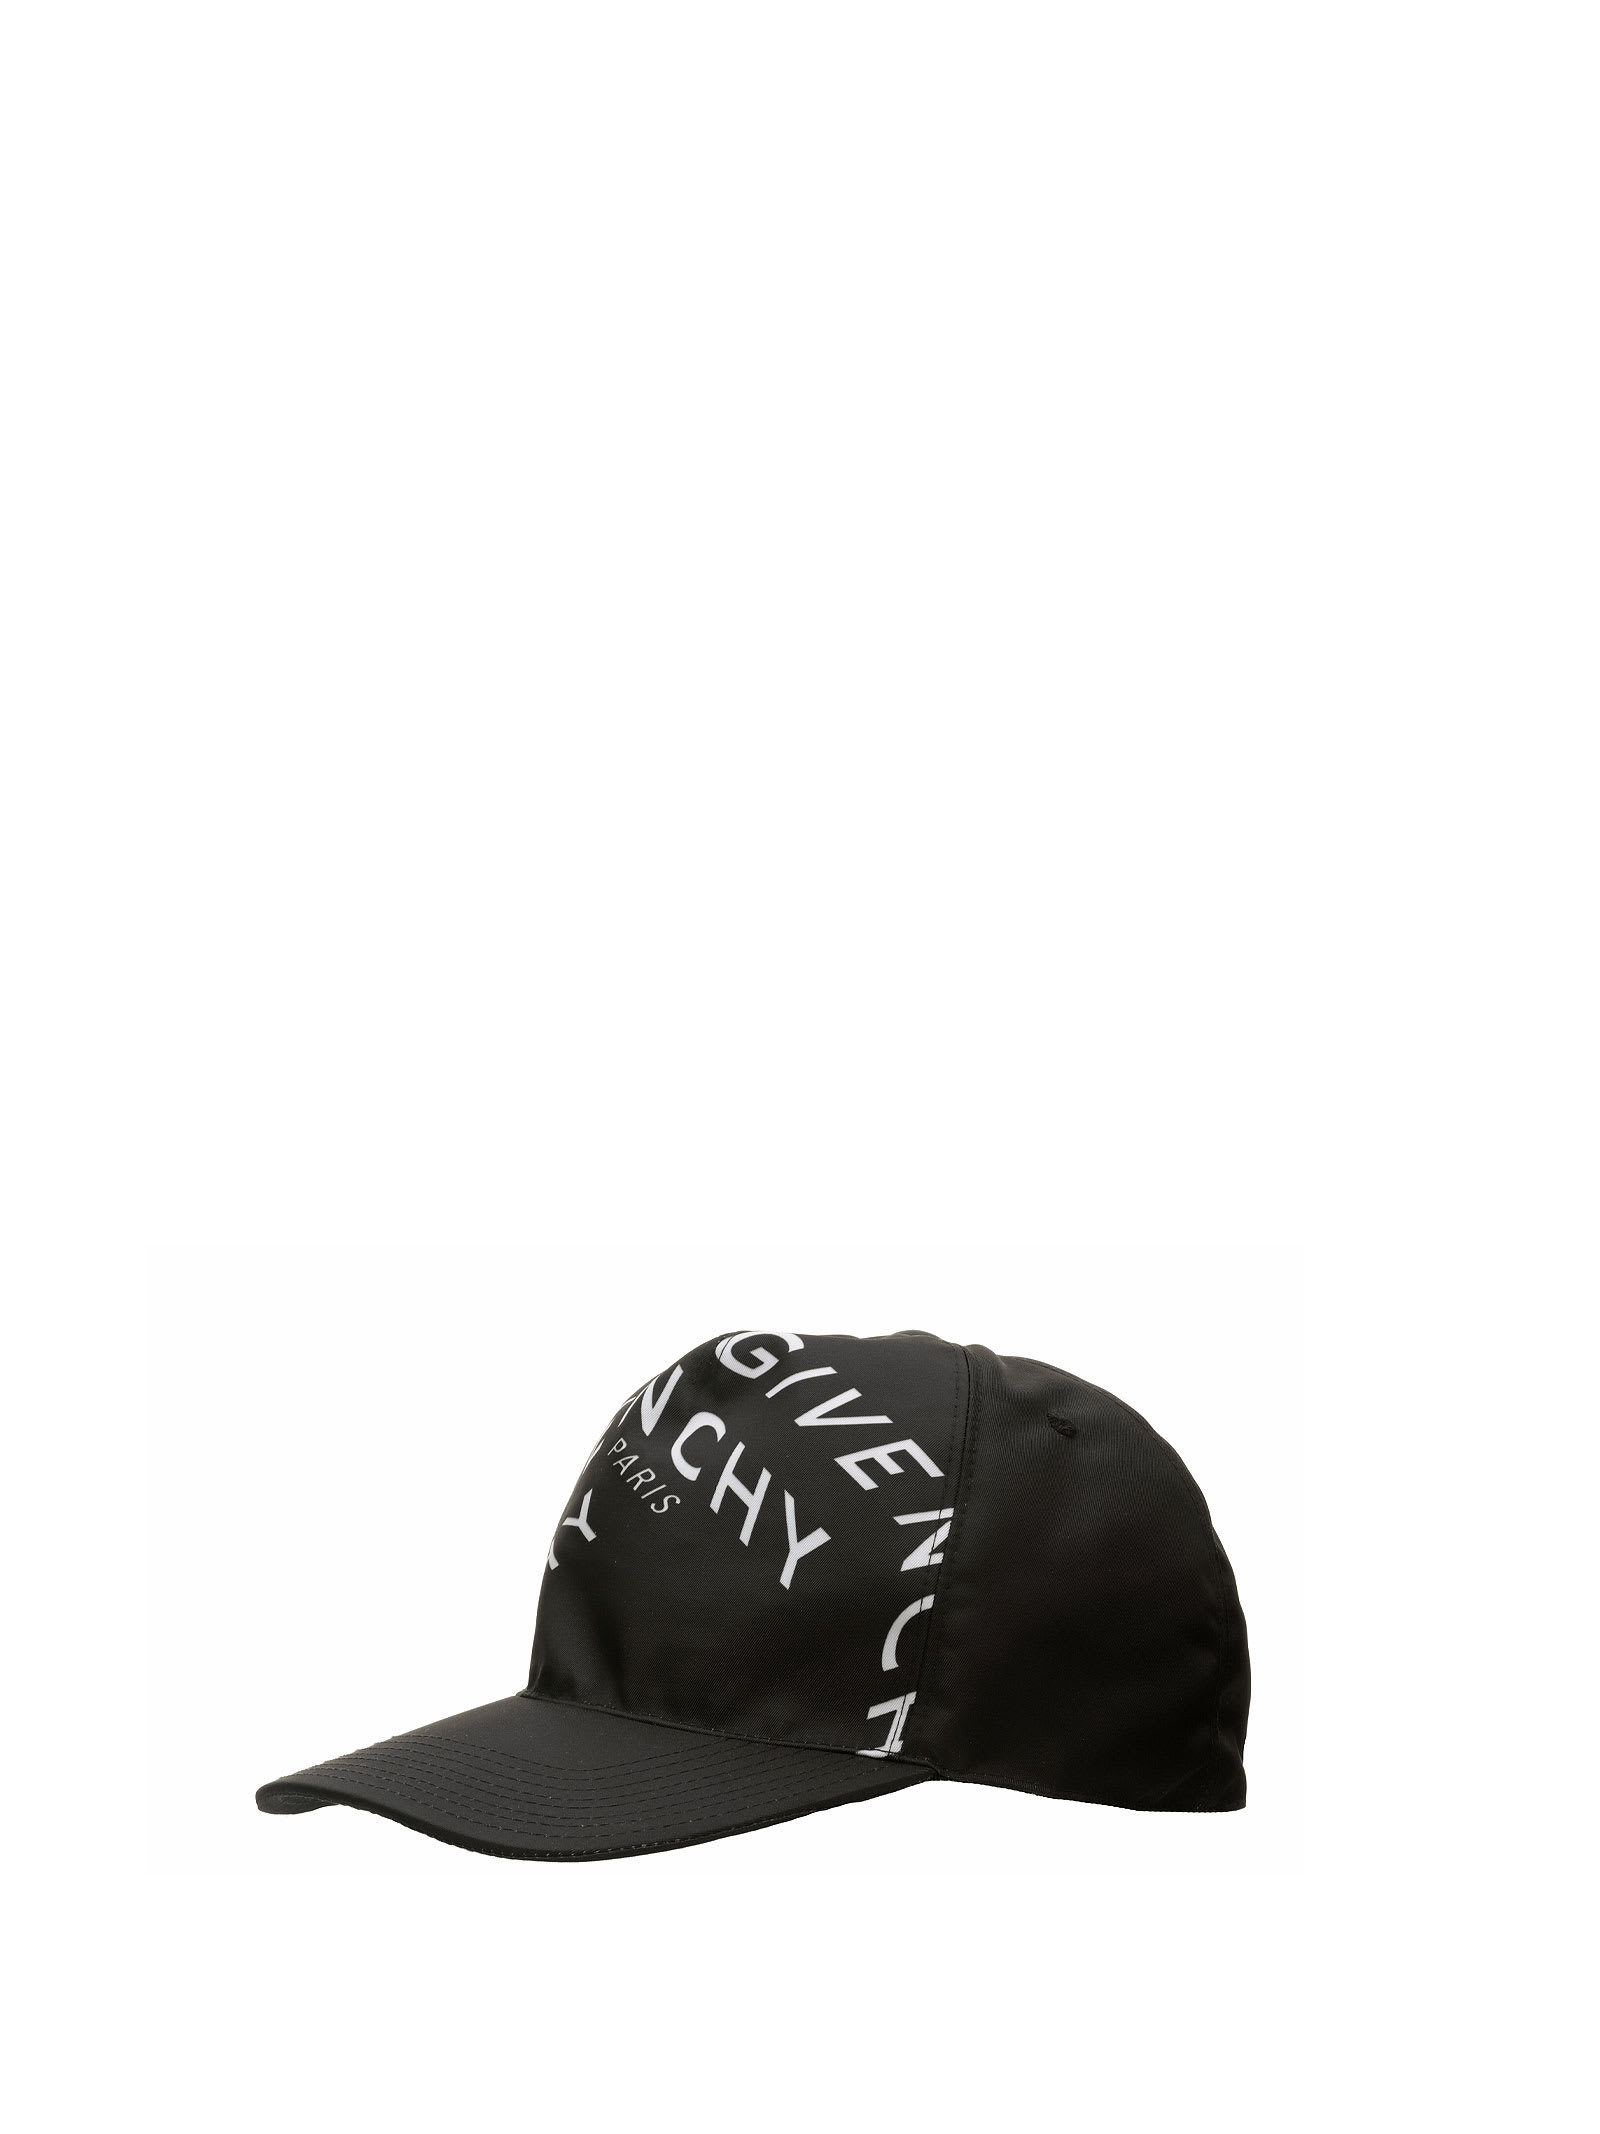 Givenchy Refracted Logo Cap